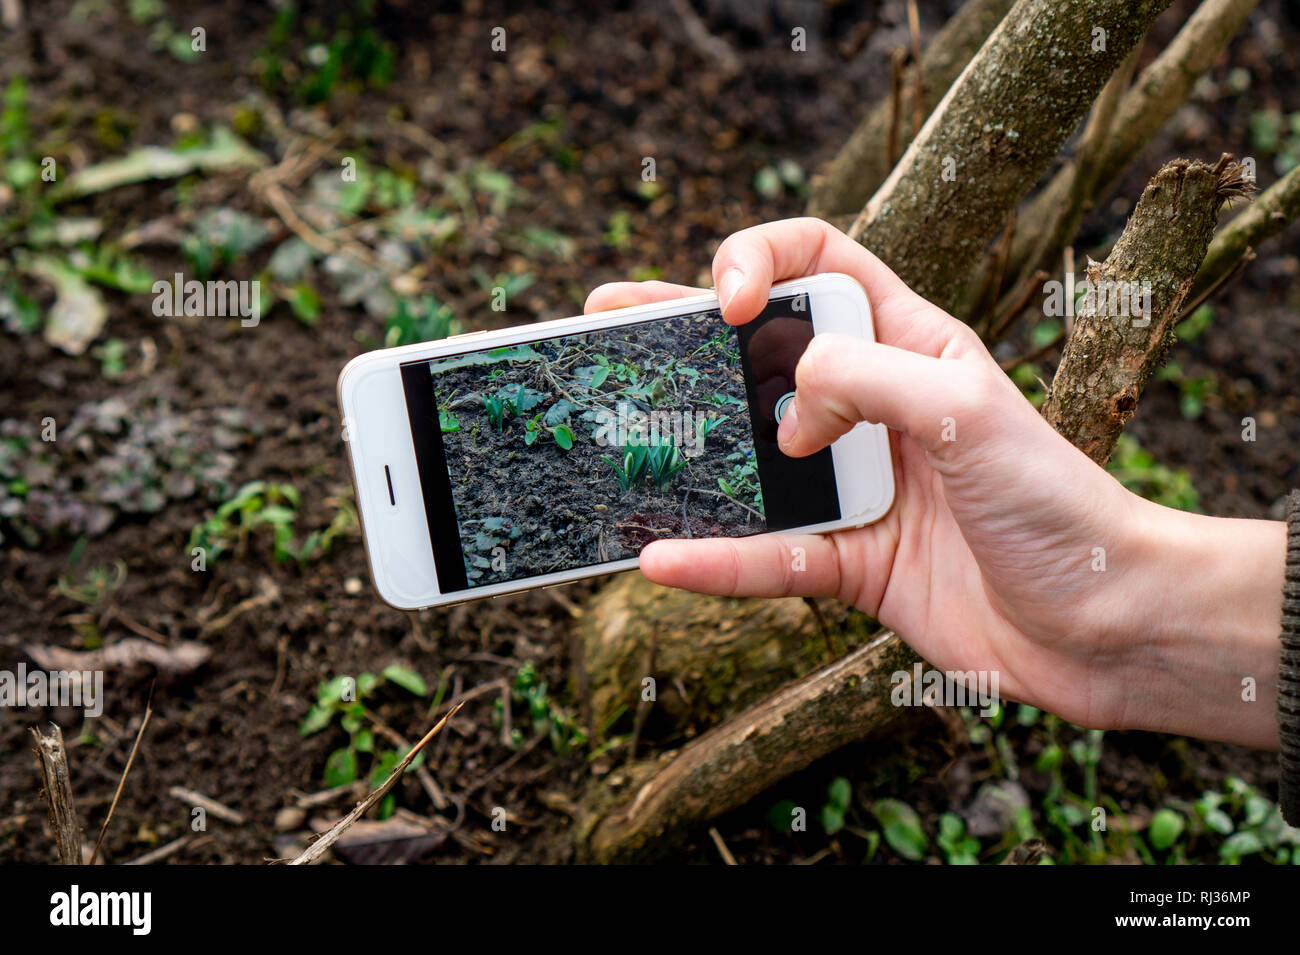 growing first snowdrop fair maid on the smartphone sceen plant identification handbook application use technlolgy in the nature uplugged Stock Photo